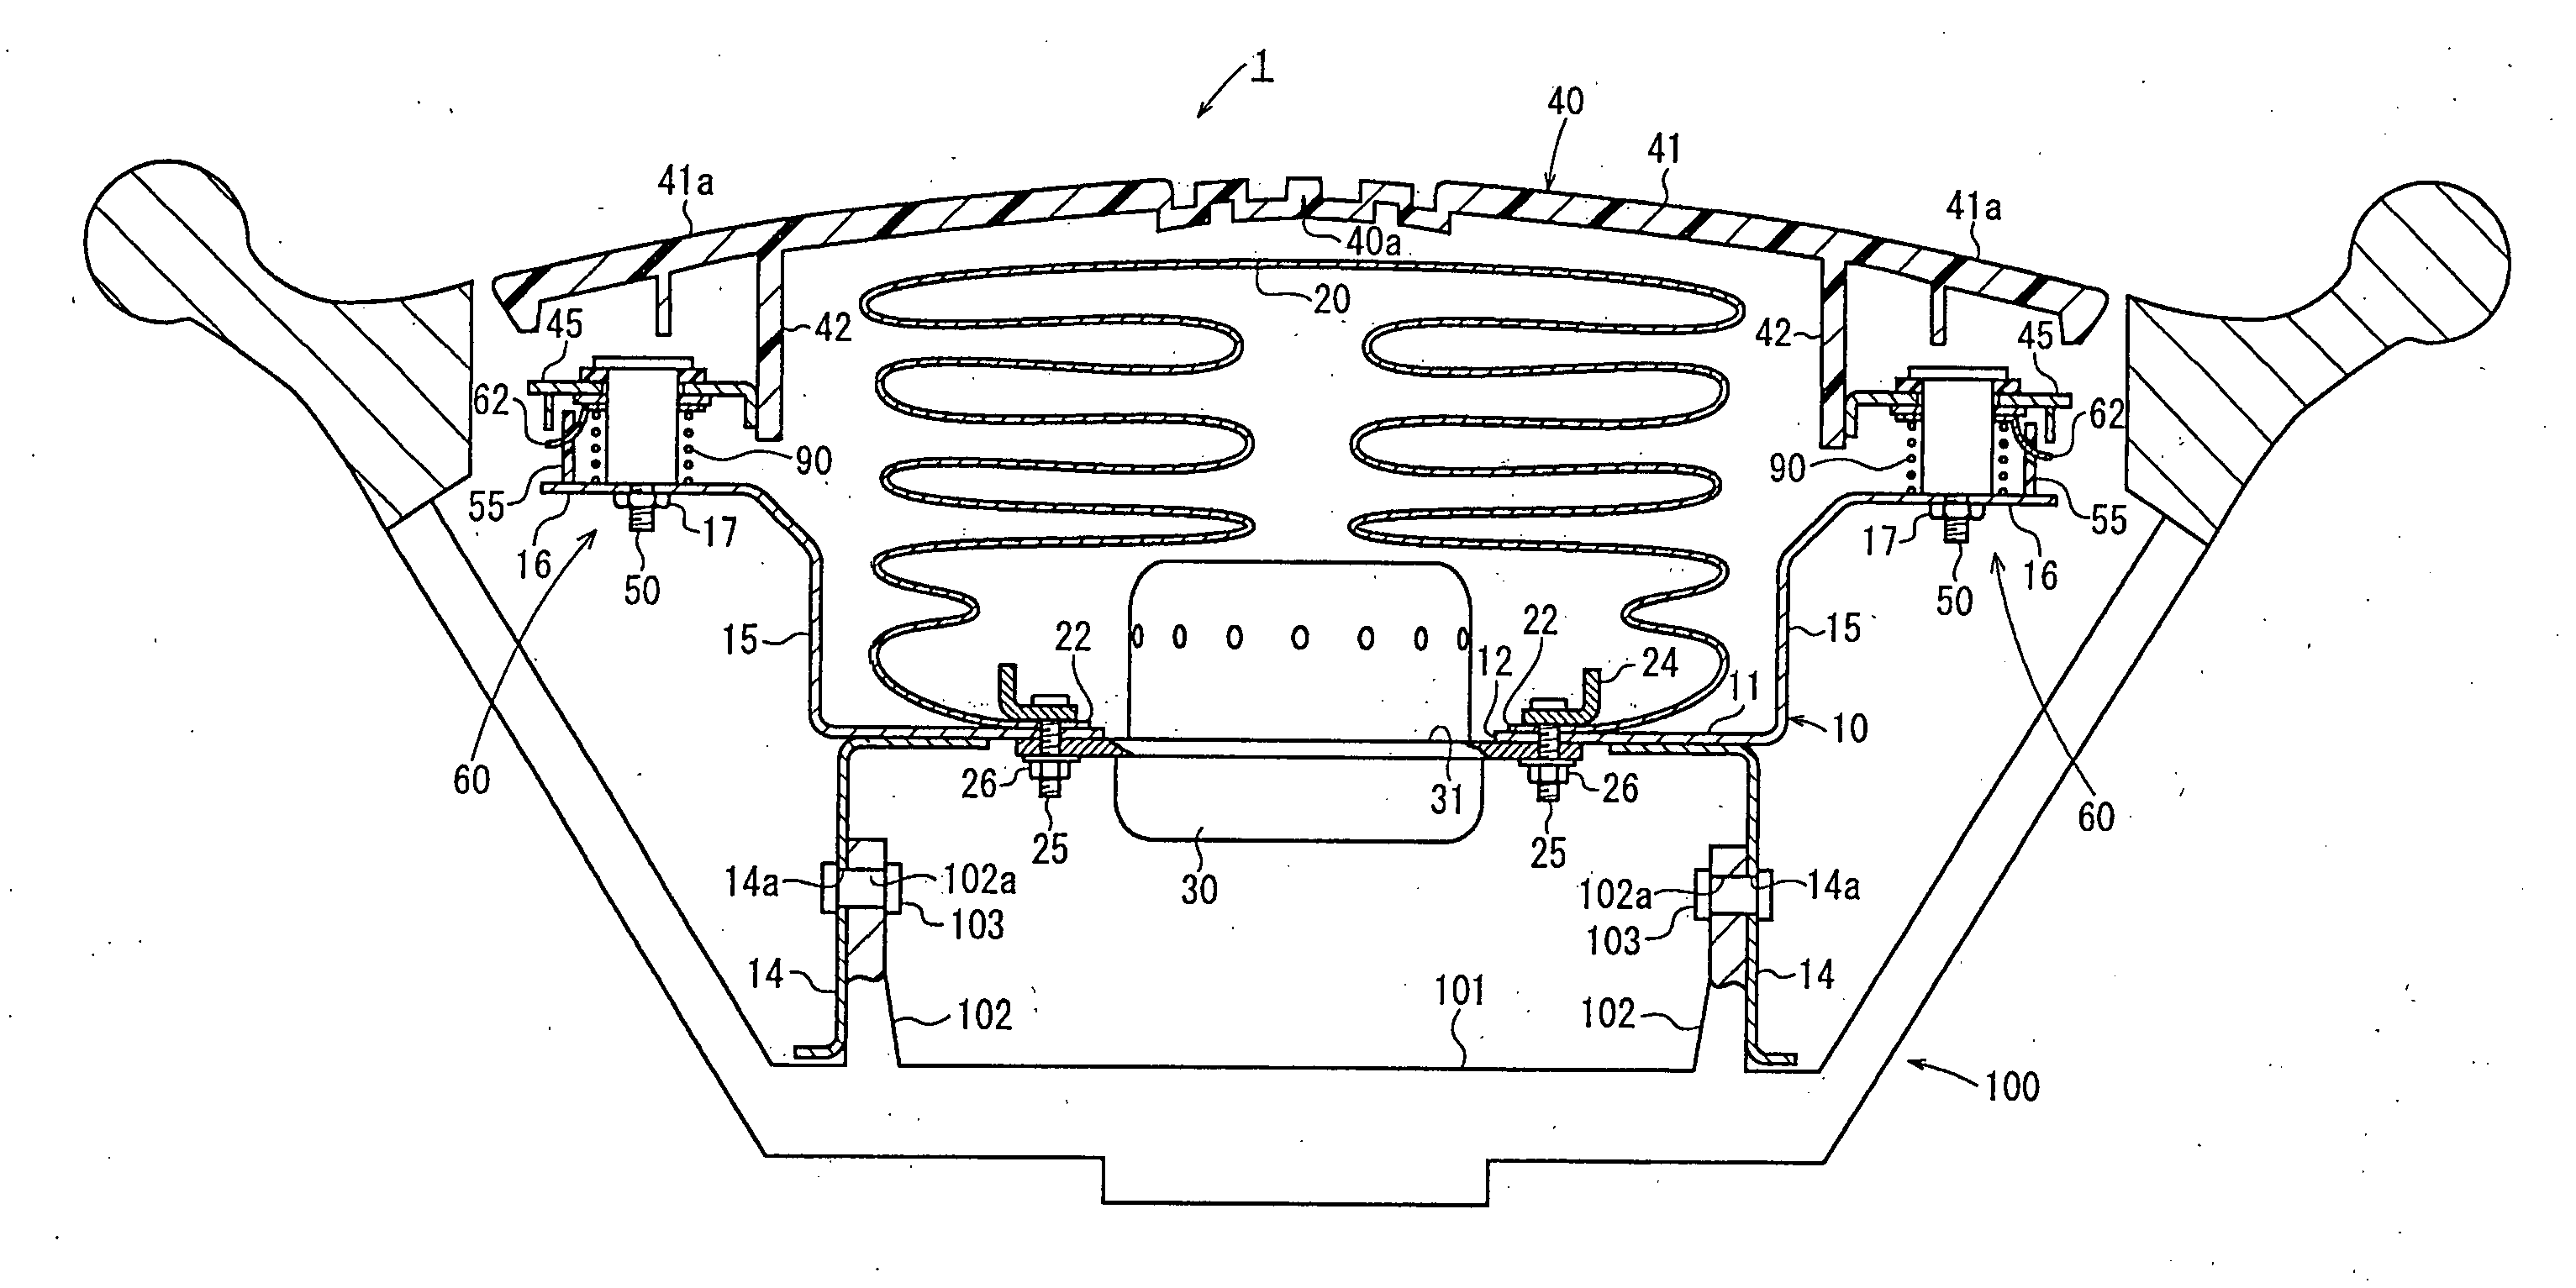 Horn switch device, airbag system, and steering wheel